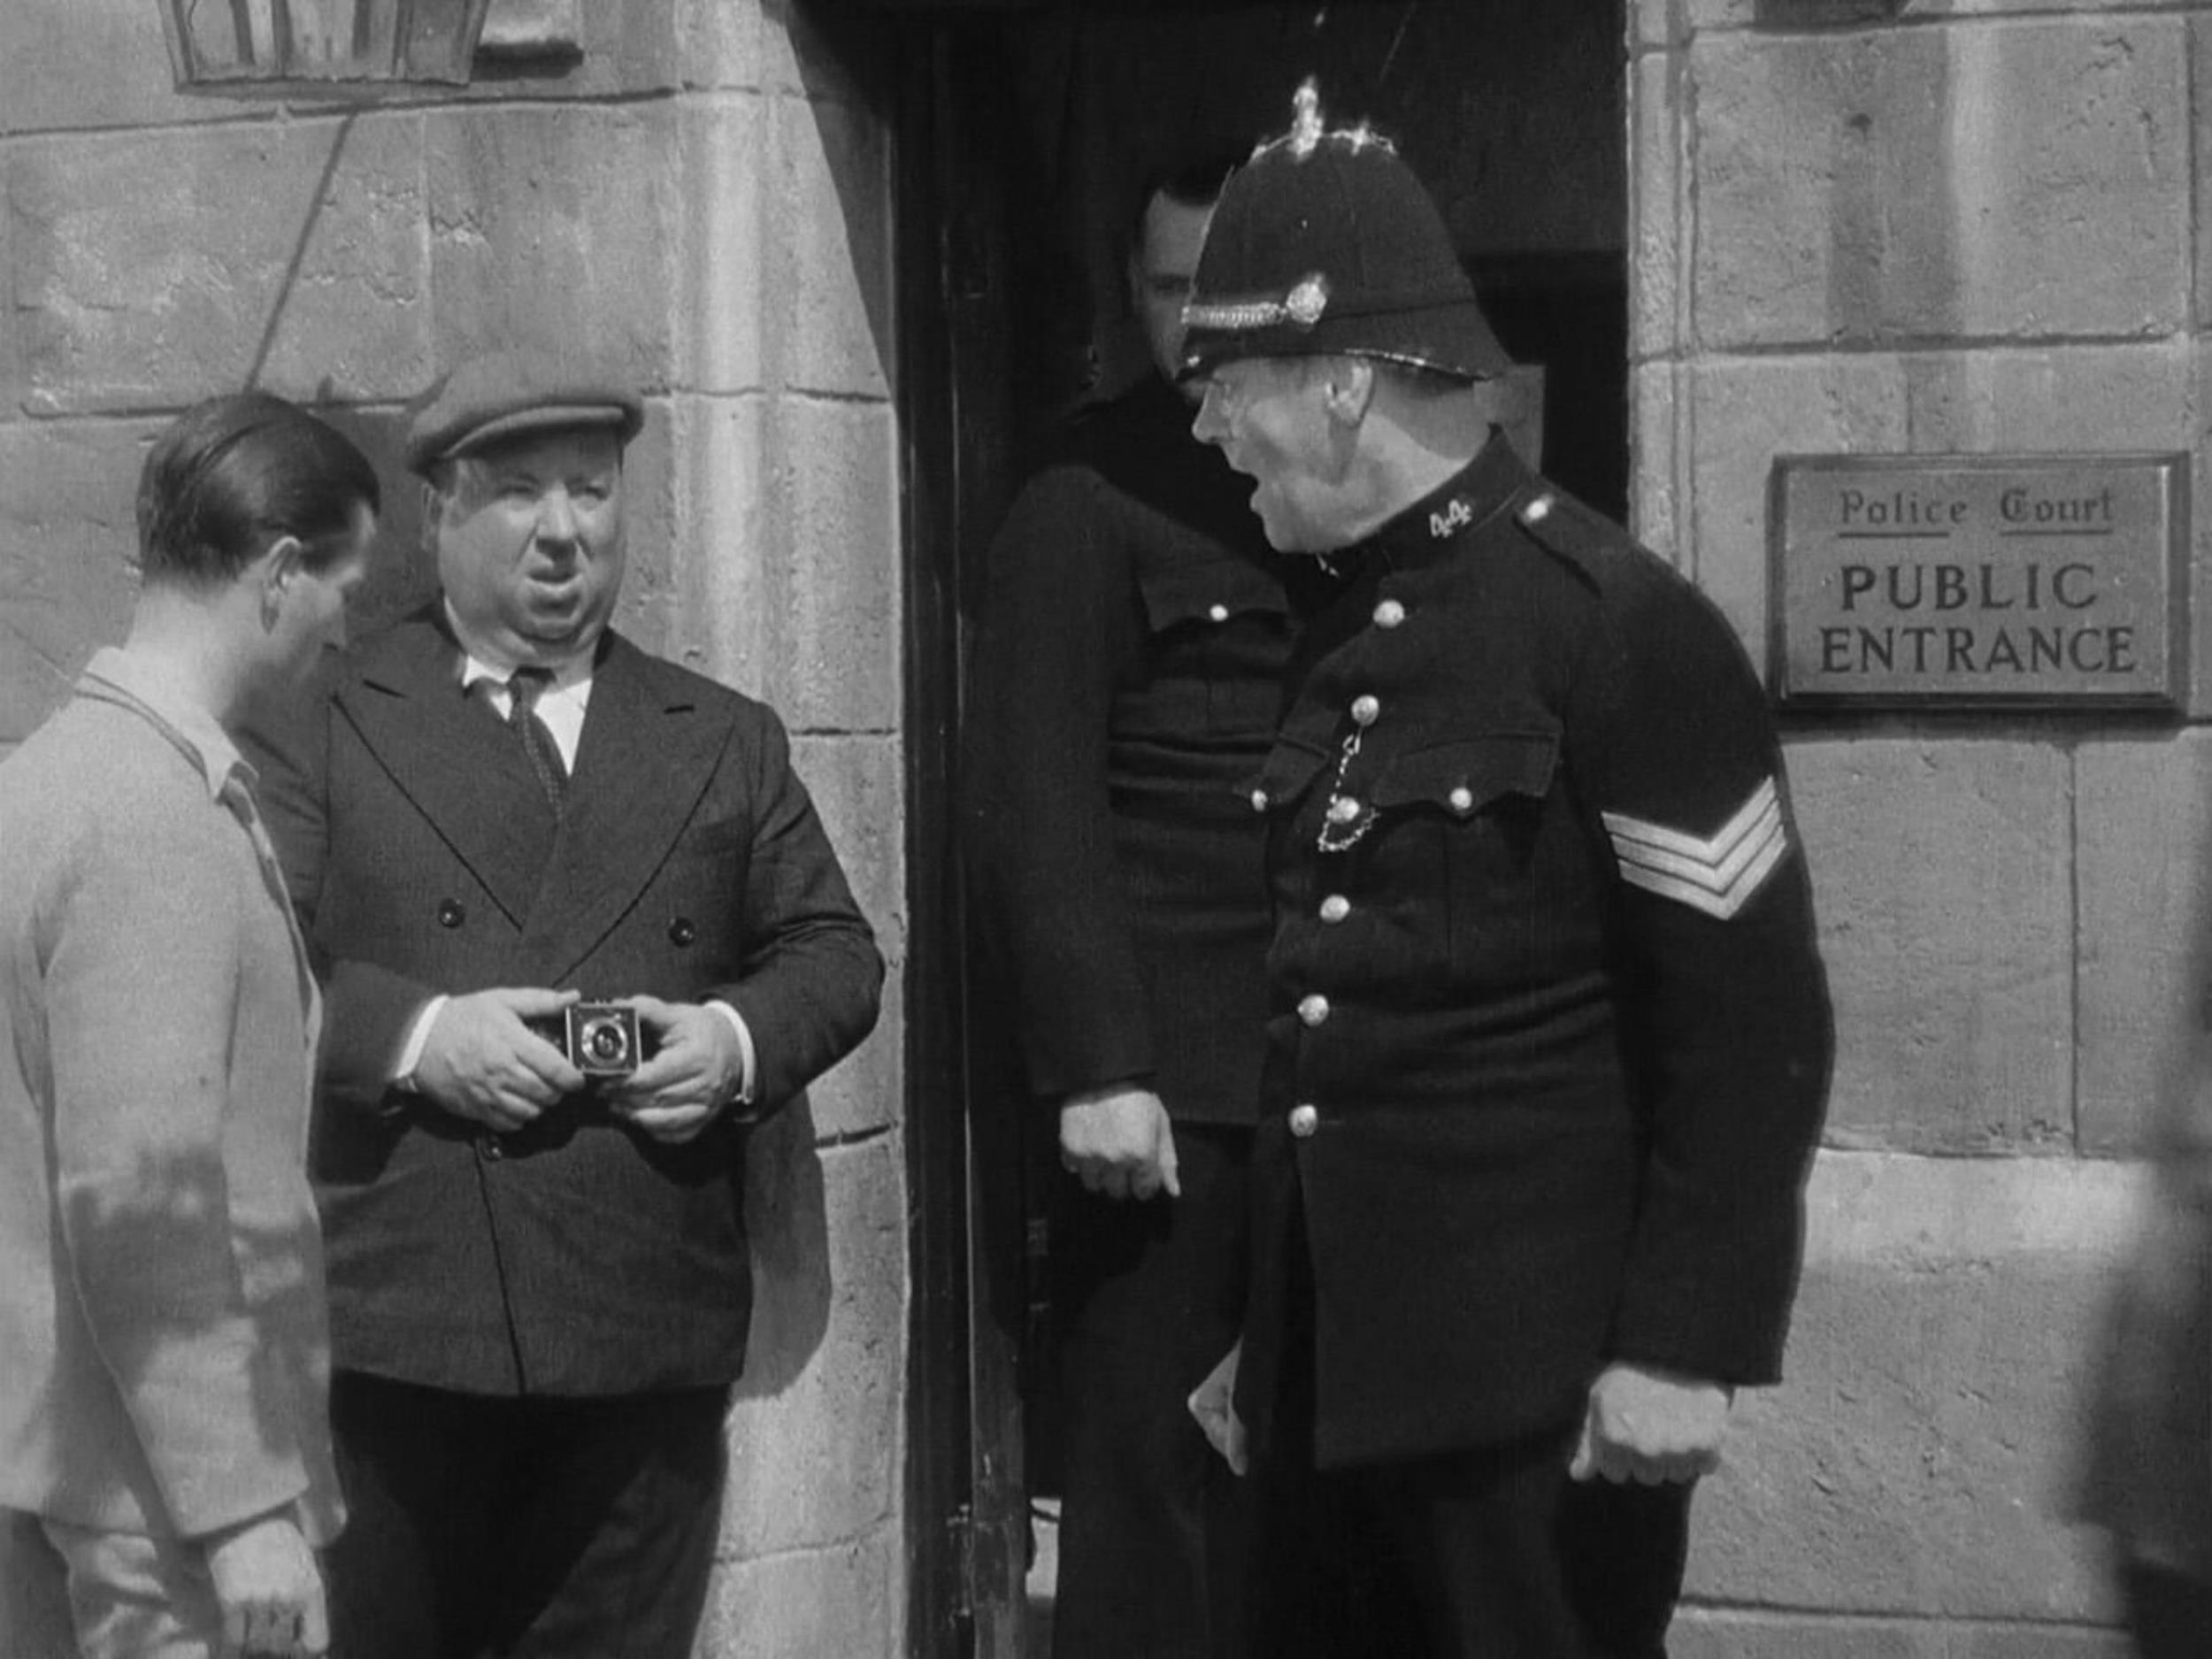 <p>Also known as “The Girl Was Young,” you can see Hitchcock’s face clear as day early in this movie. He’s wearing a hat and messing with a camera standing outside the courthouse. The director holding a camera? Now that’s meta!</p><p>You may also like: <a href='https://www.yardbarker.com/entertainment/articles/cover_songs_that_are_better_than_the_originals/s1__38770398'>Cover songs that are better than the originals</a></p>